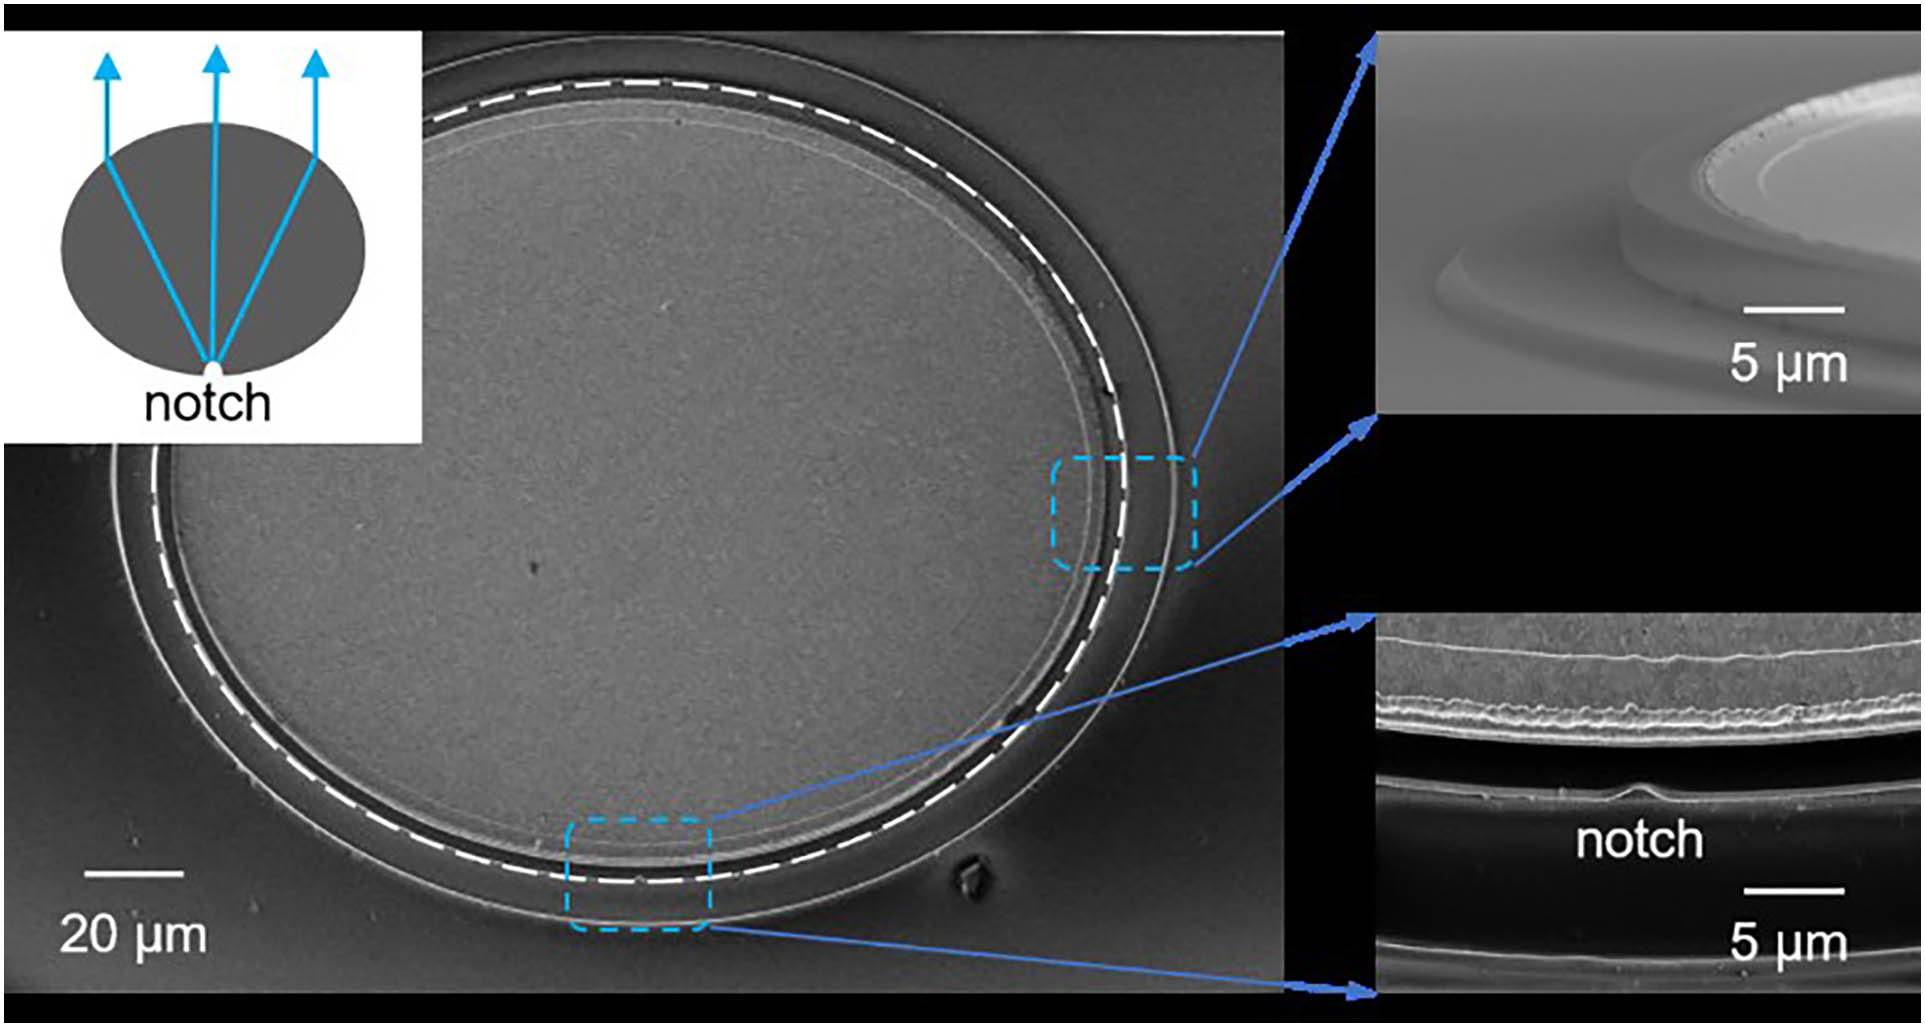 Scanning electron microscope image of the notched elliptical resonator. The white line is the cavity boundary. The upper left inset shows the schematic illustration of the notched elliptical resonator. The right inset shows the smooth sidewall of the laser cavity and a detail of the cavity.